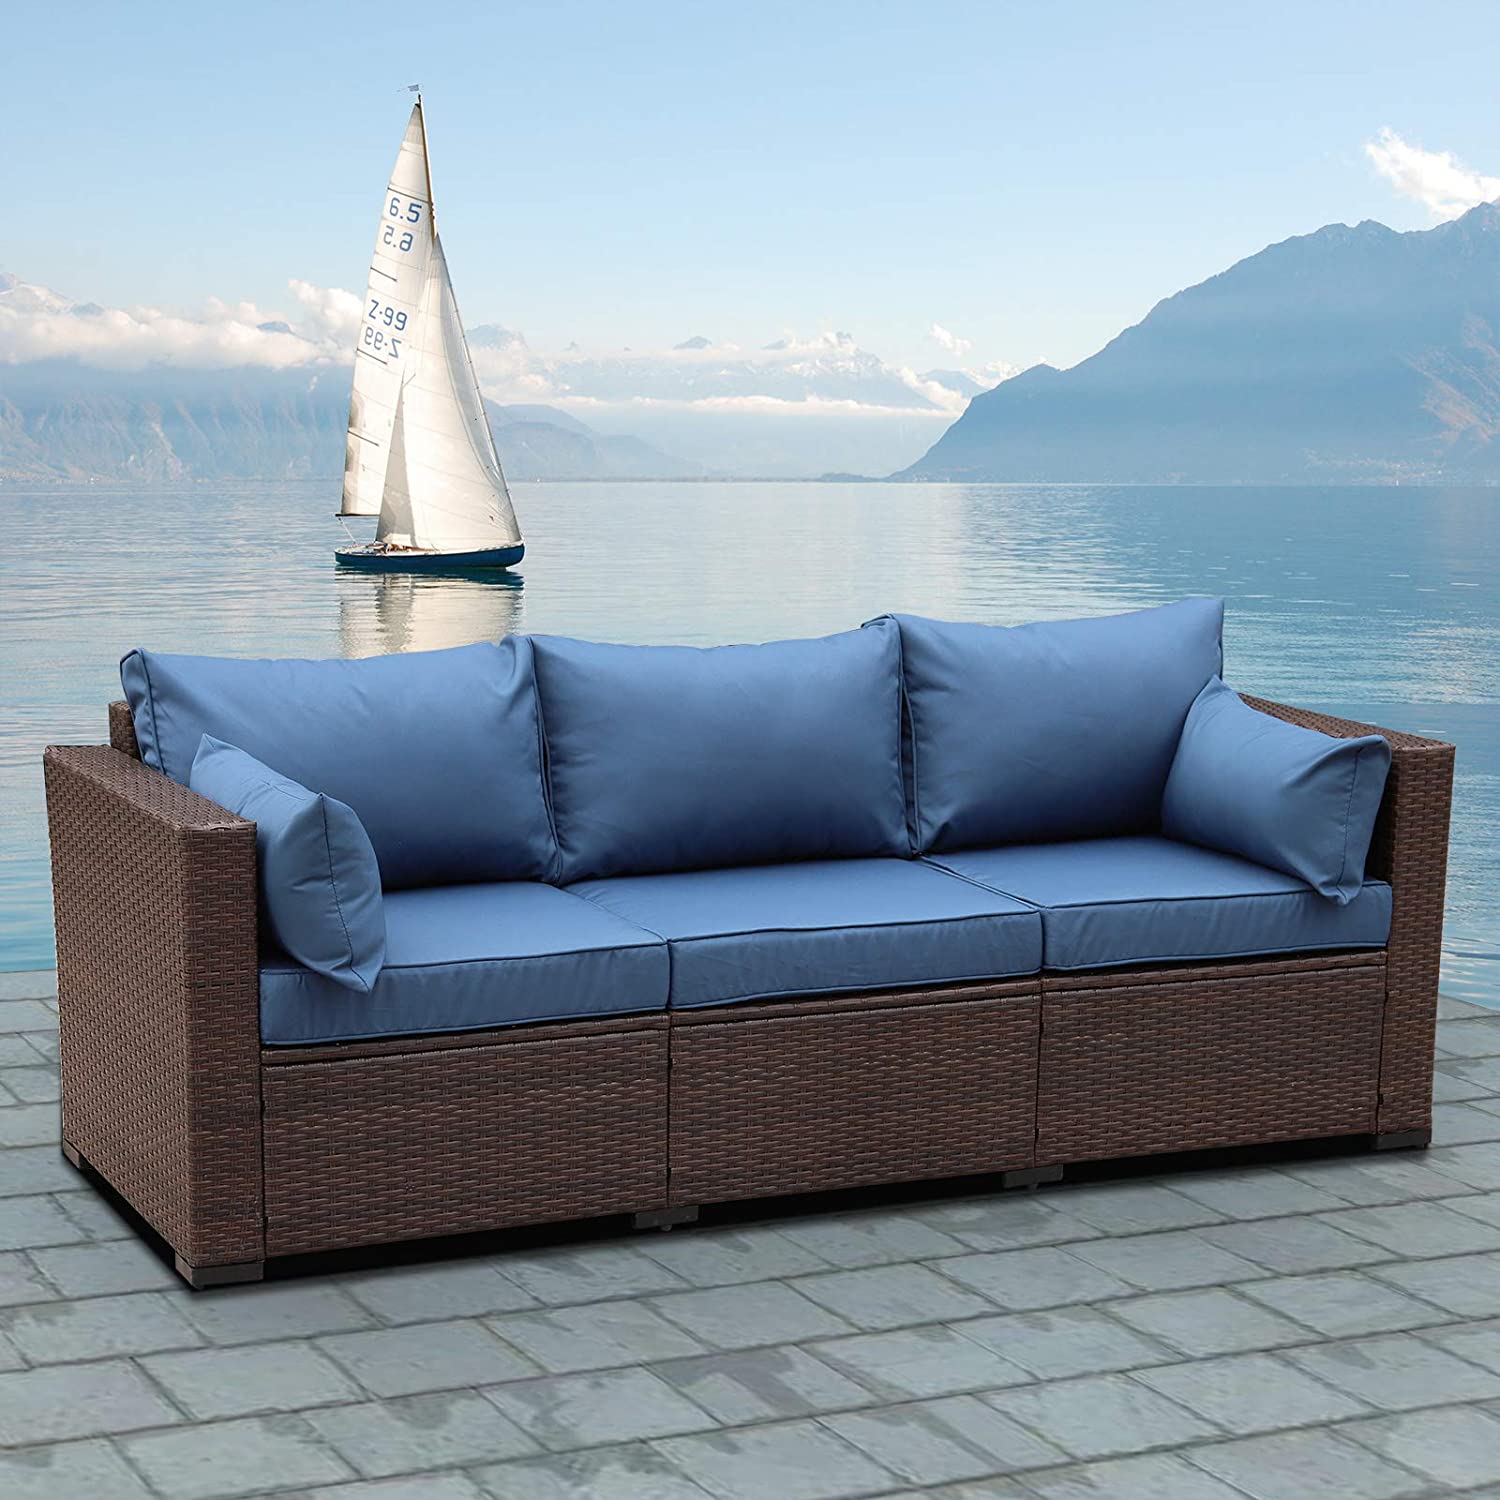 Rattaner Outdoor Rattan Couch Patio Furniture